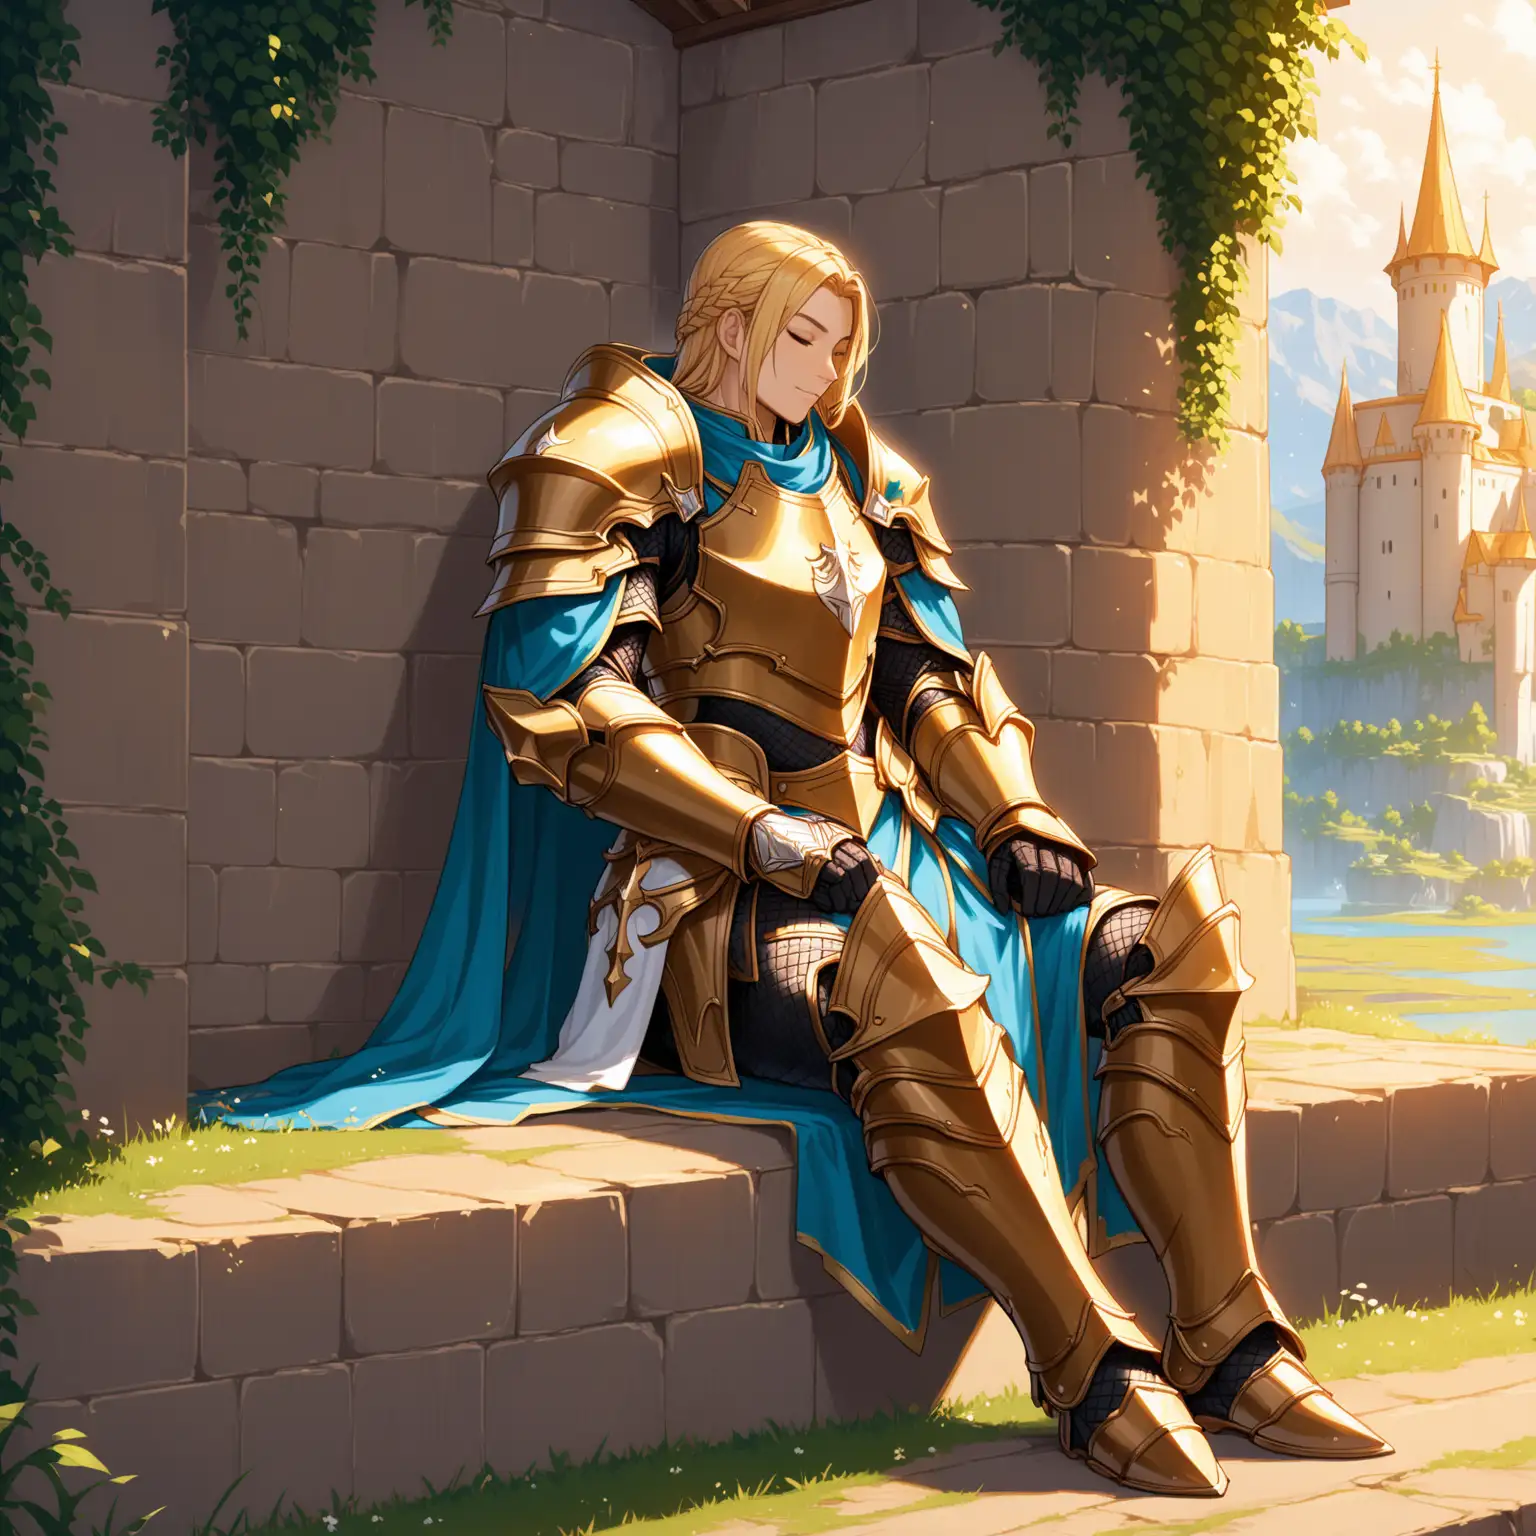 A paladin taking a rest